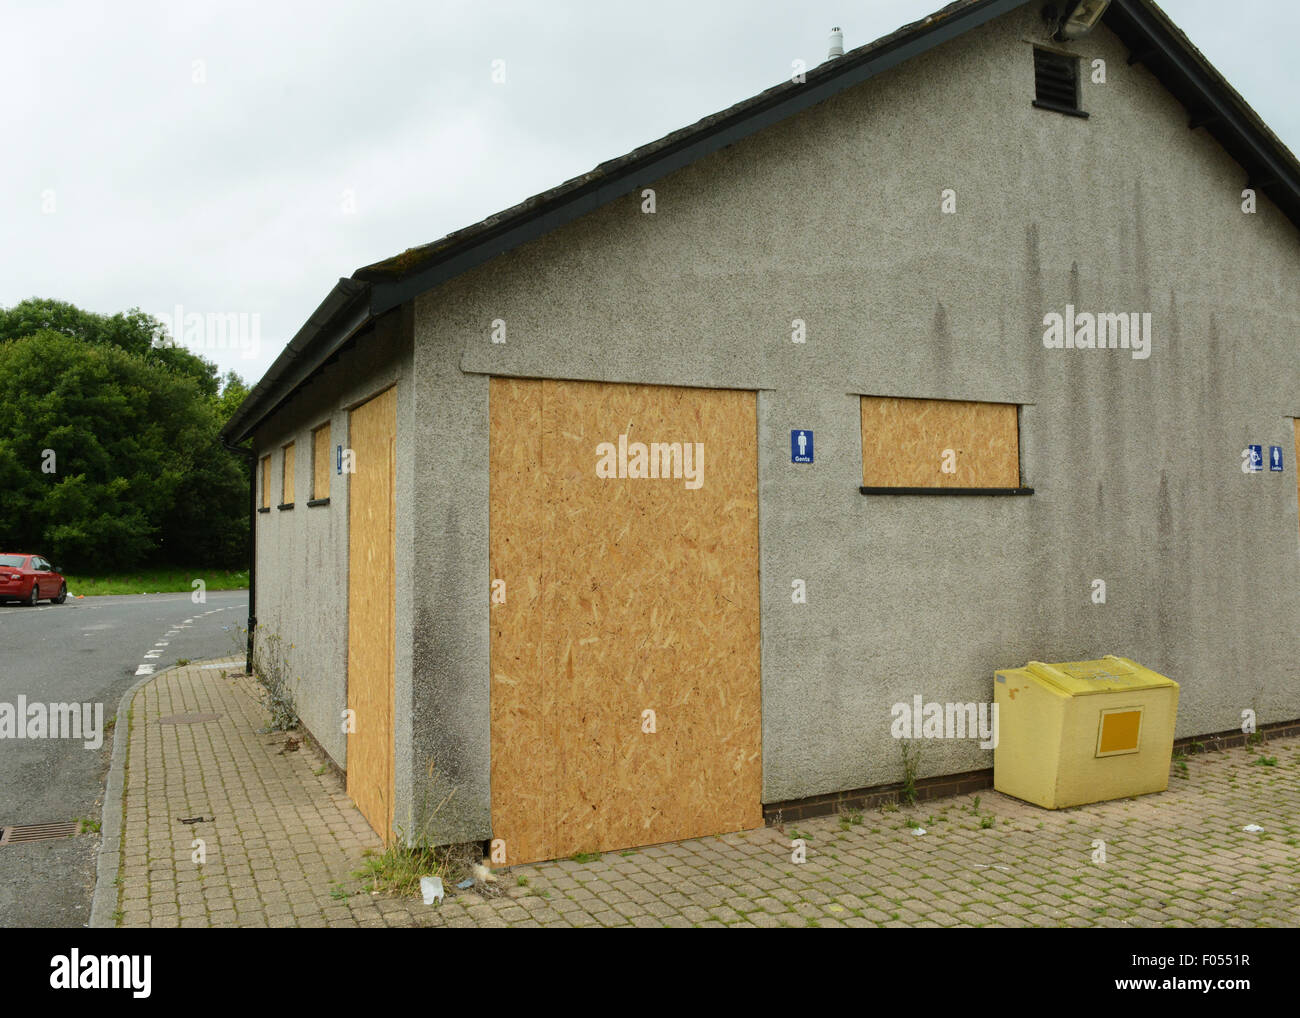 Closed Toilets Blocks on A39 Boarded Up Toilet Blocks Closed Rest Areas Spending Cuts Devon County Council Litter North Devon Stock Photo